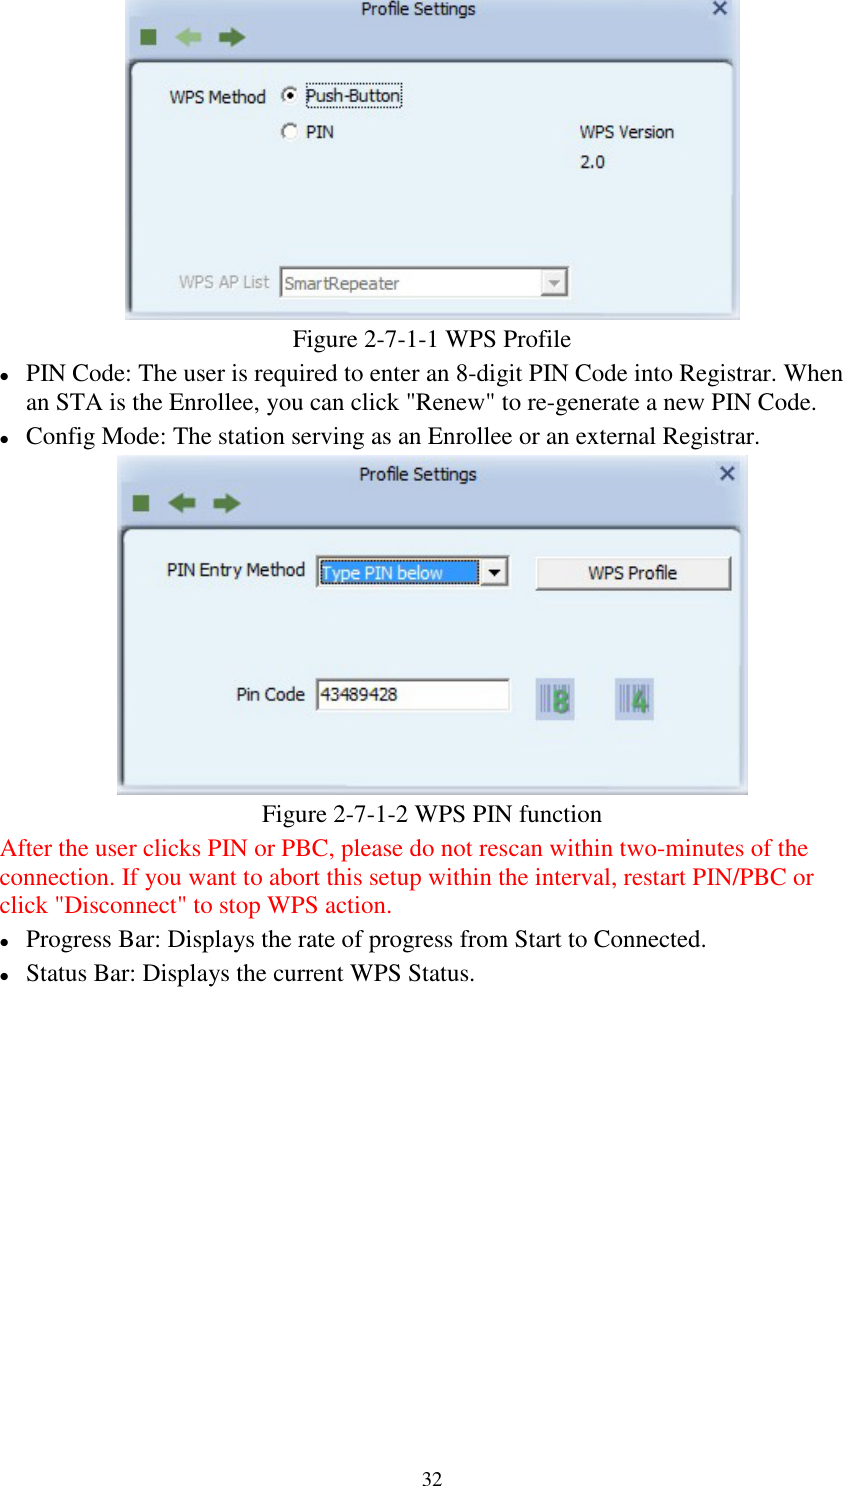 32Figure 2-7-1-1 WPS ProfilePIN Code: The user is required to enter an 8-digit PIN Code into Registrar. Whenan STA is the Enrollee, you can click &quot;Renew&quot; to re-generate a new PIN Code.Config Mode: The station serving as an Enrollee or an external Registrar.Figure 2-7-1-2 WPS PIN functionAfter the user clicks PIN or PBC, please do not rescan within two-minutes of theconnection. If you want to abort this setup within the interval, restart PIN/PBC orclick &quot;Disconnect&quot; to stop WPS action.Progress Bar: Displays the rate of progress from Start to Connected.Status Bar: Displays the current WPS Status.